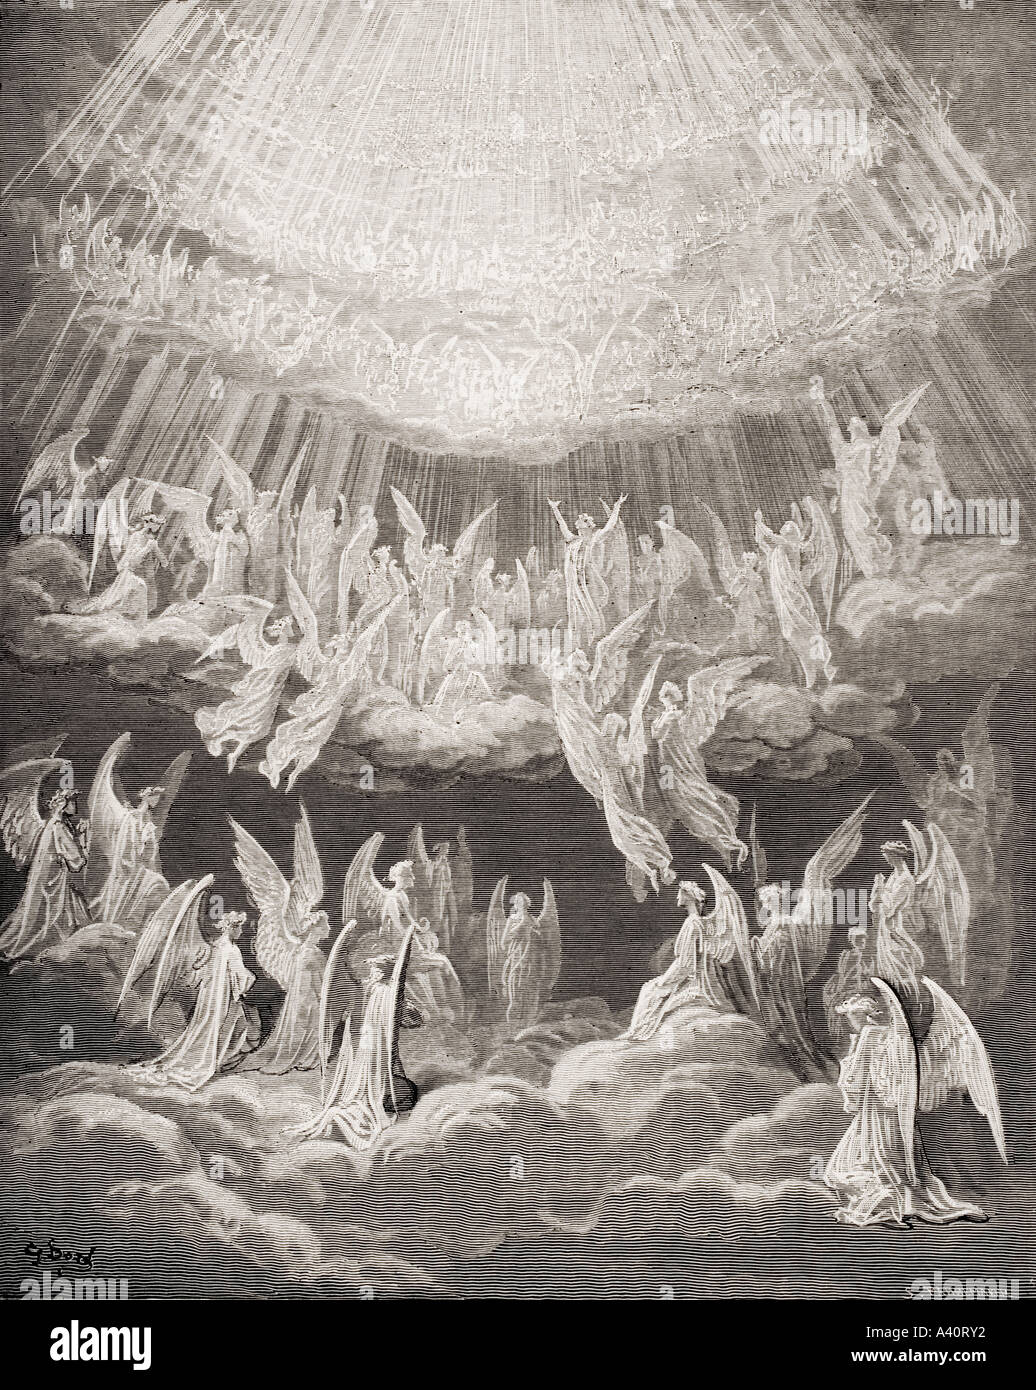 Illustration for Paradiso by Dante Alighieri.  Canto XXVII, lines 1 to 4. Glory to the Father, to the Son and to the Holy Spirit, by Gustave Dore. Stock Photo